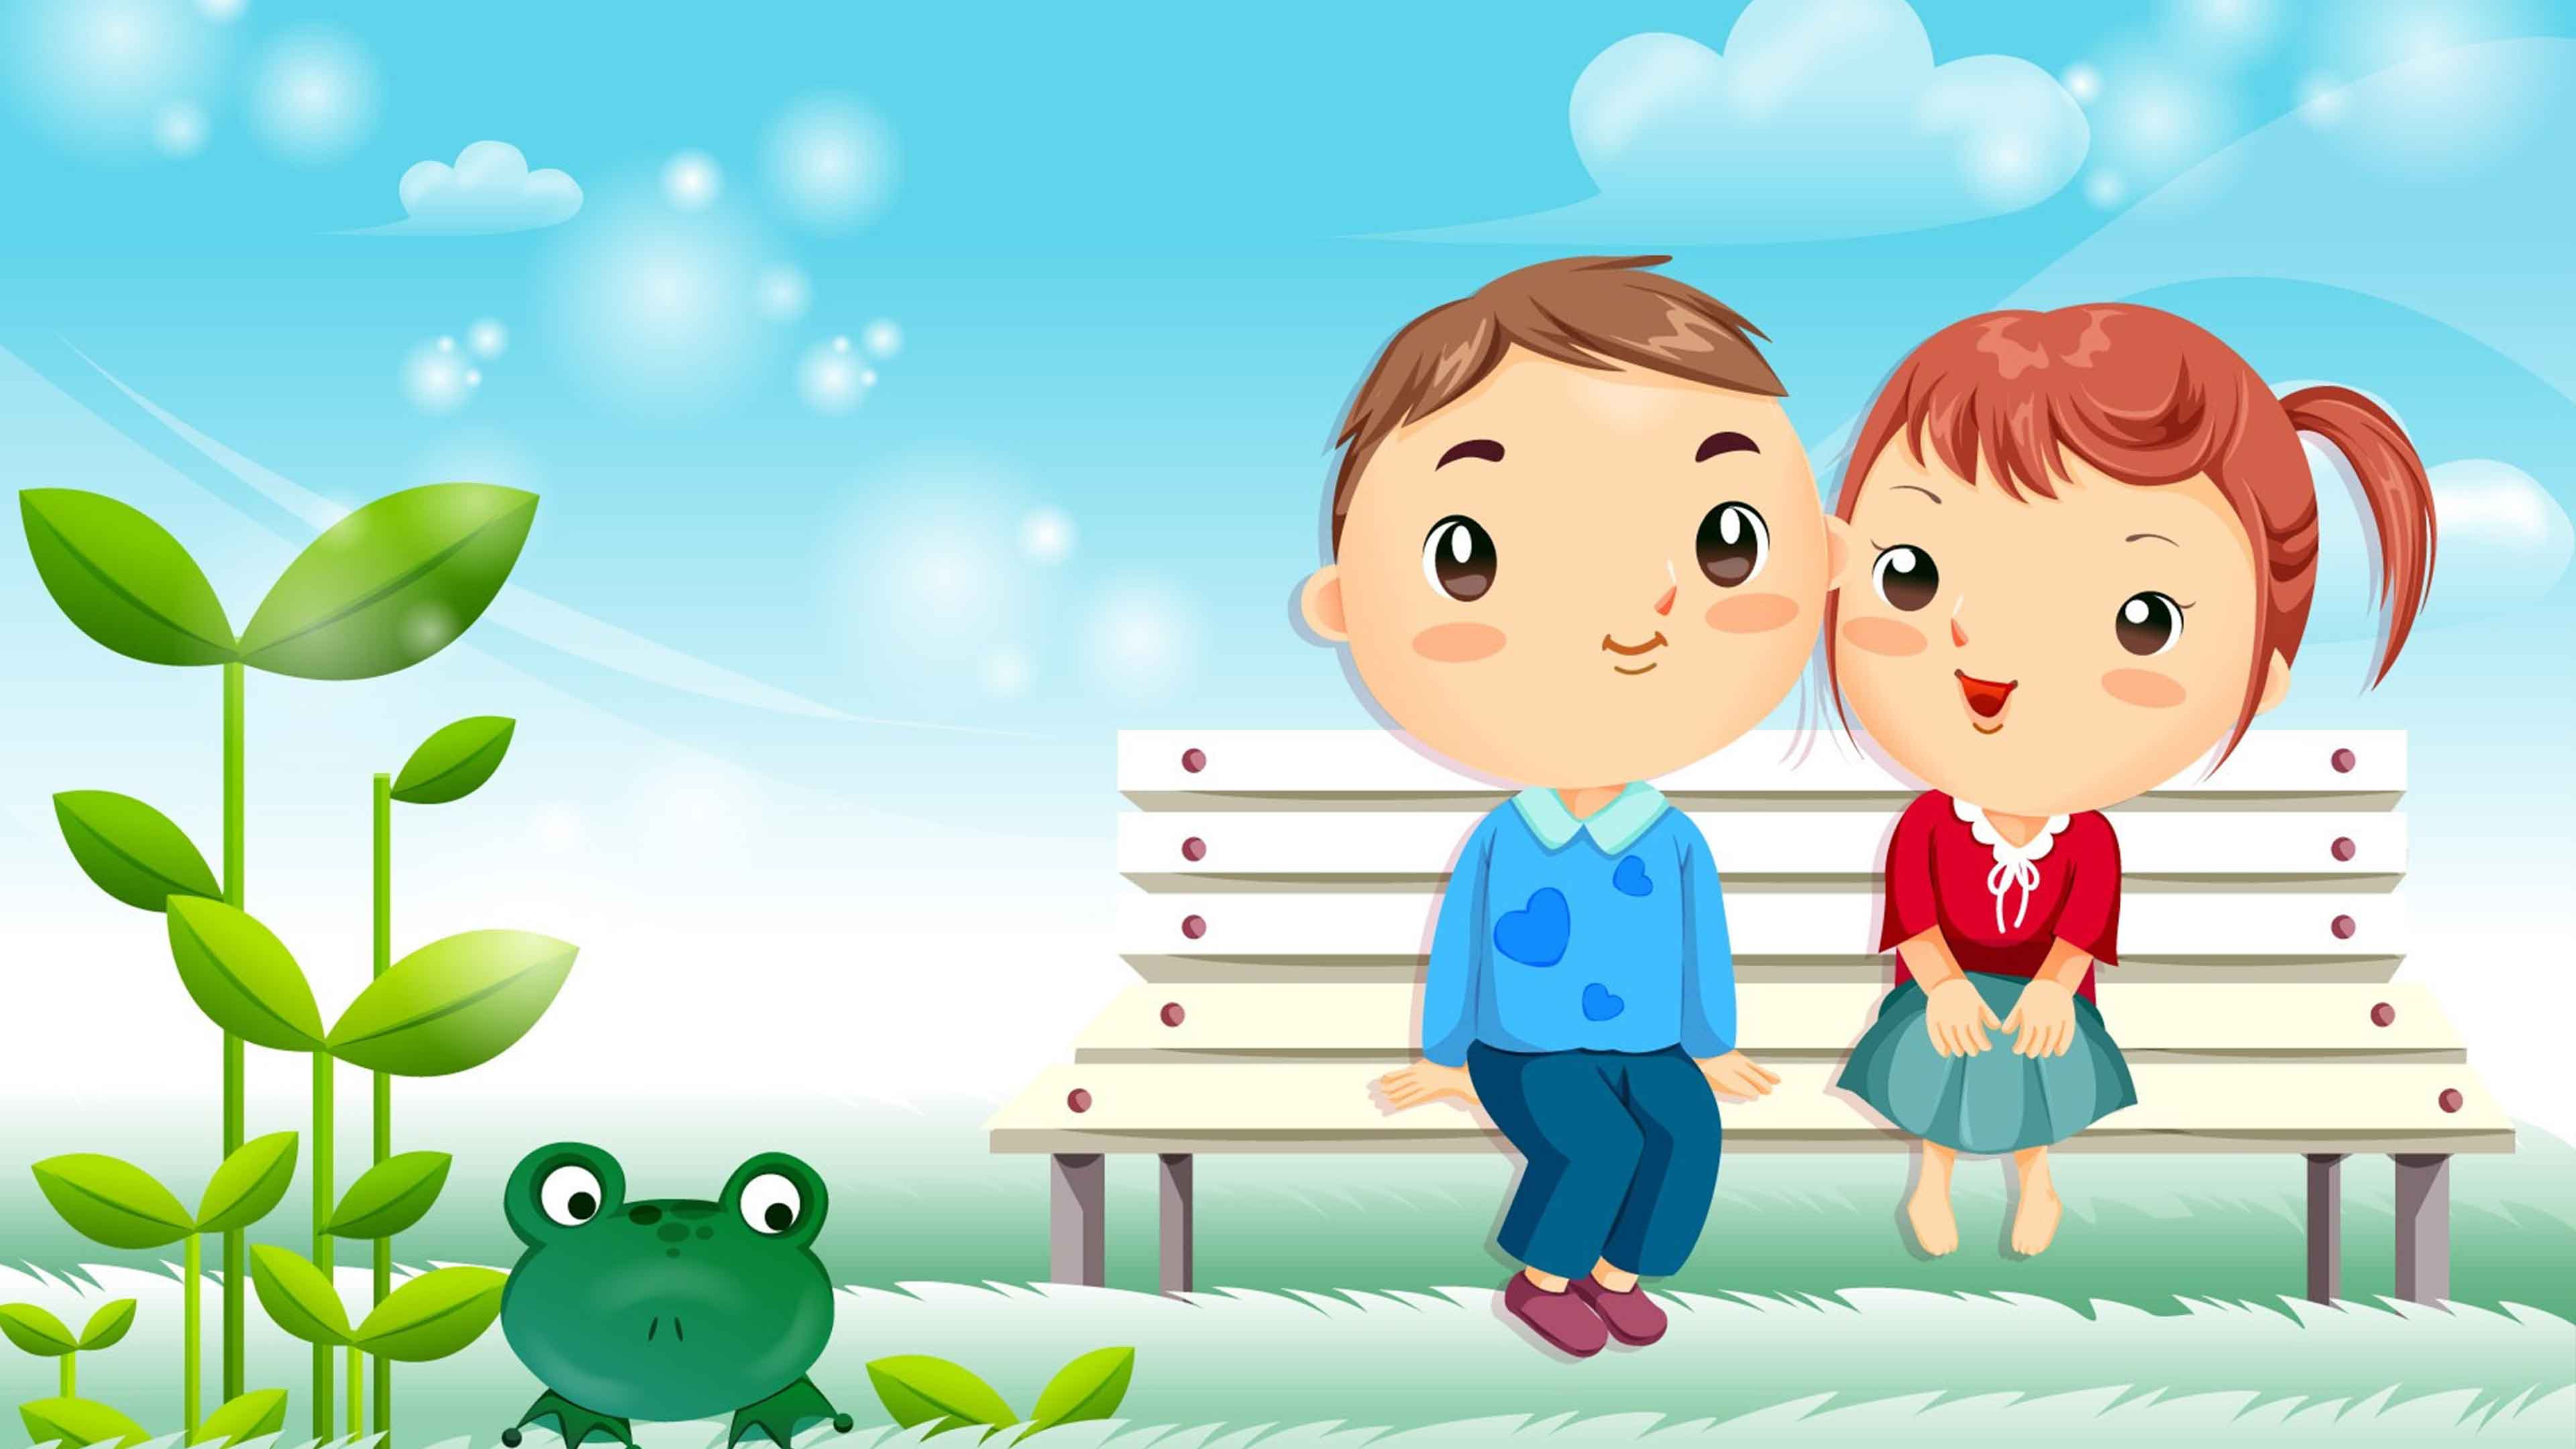 Cartoon Love Couple Images Hd : Cartoon Couple Wallpaper Hd For Mobile ...